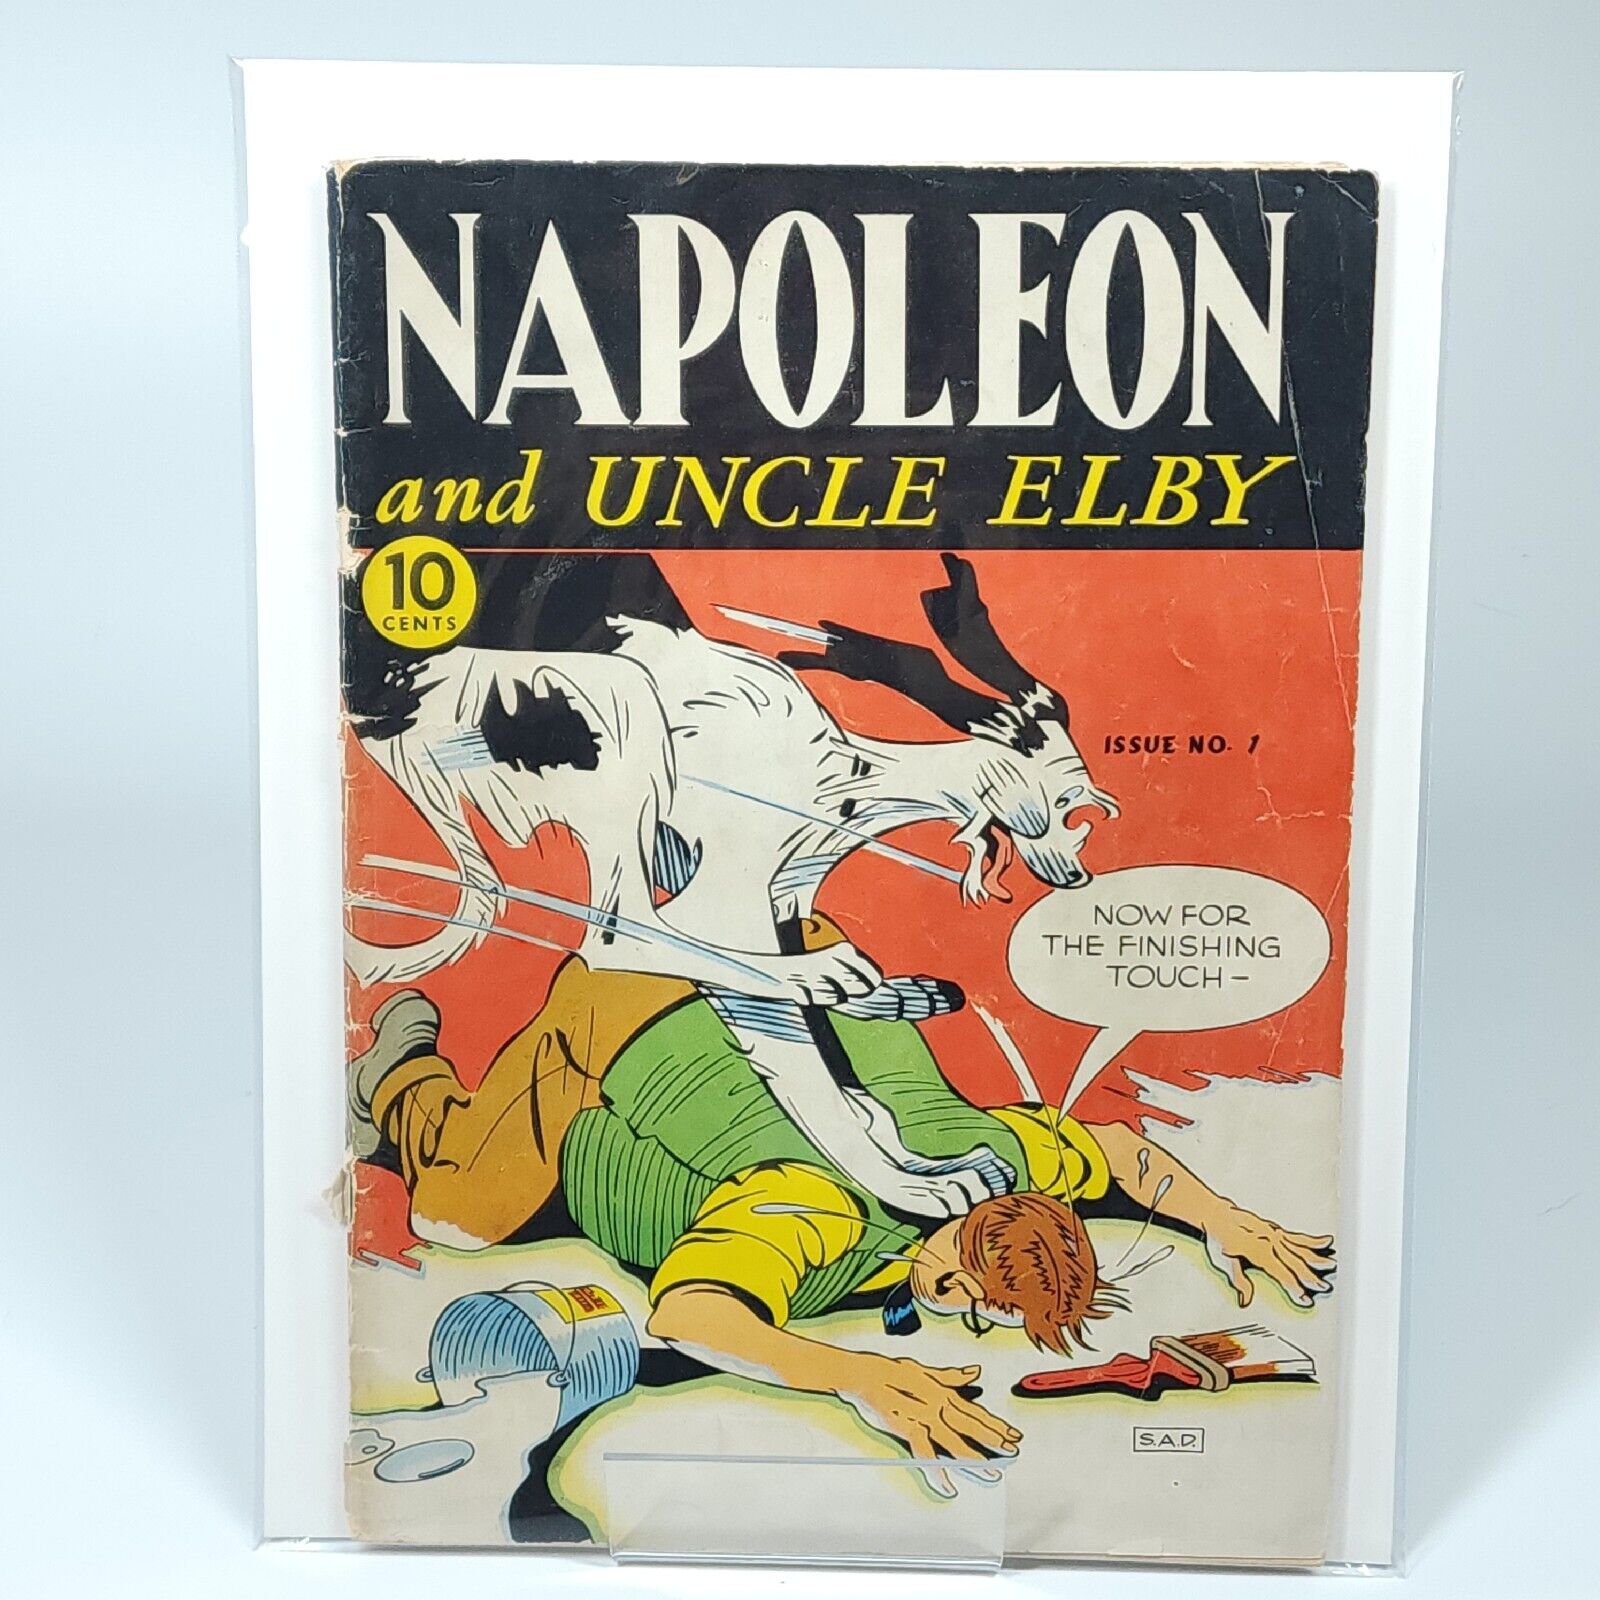 Napoleon and Uncle Elby #1 (1942) • Eastern Color • 10 Cent Golden Age Comic